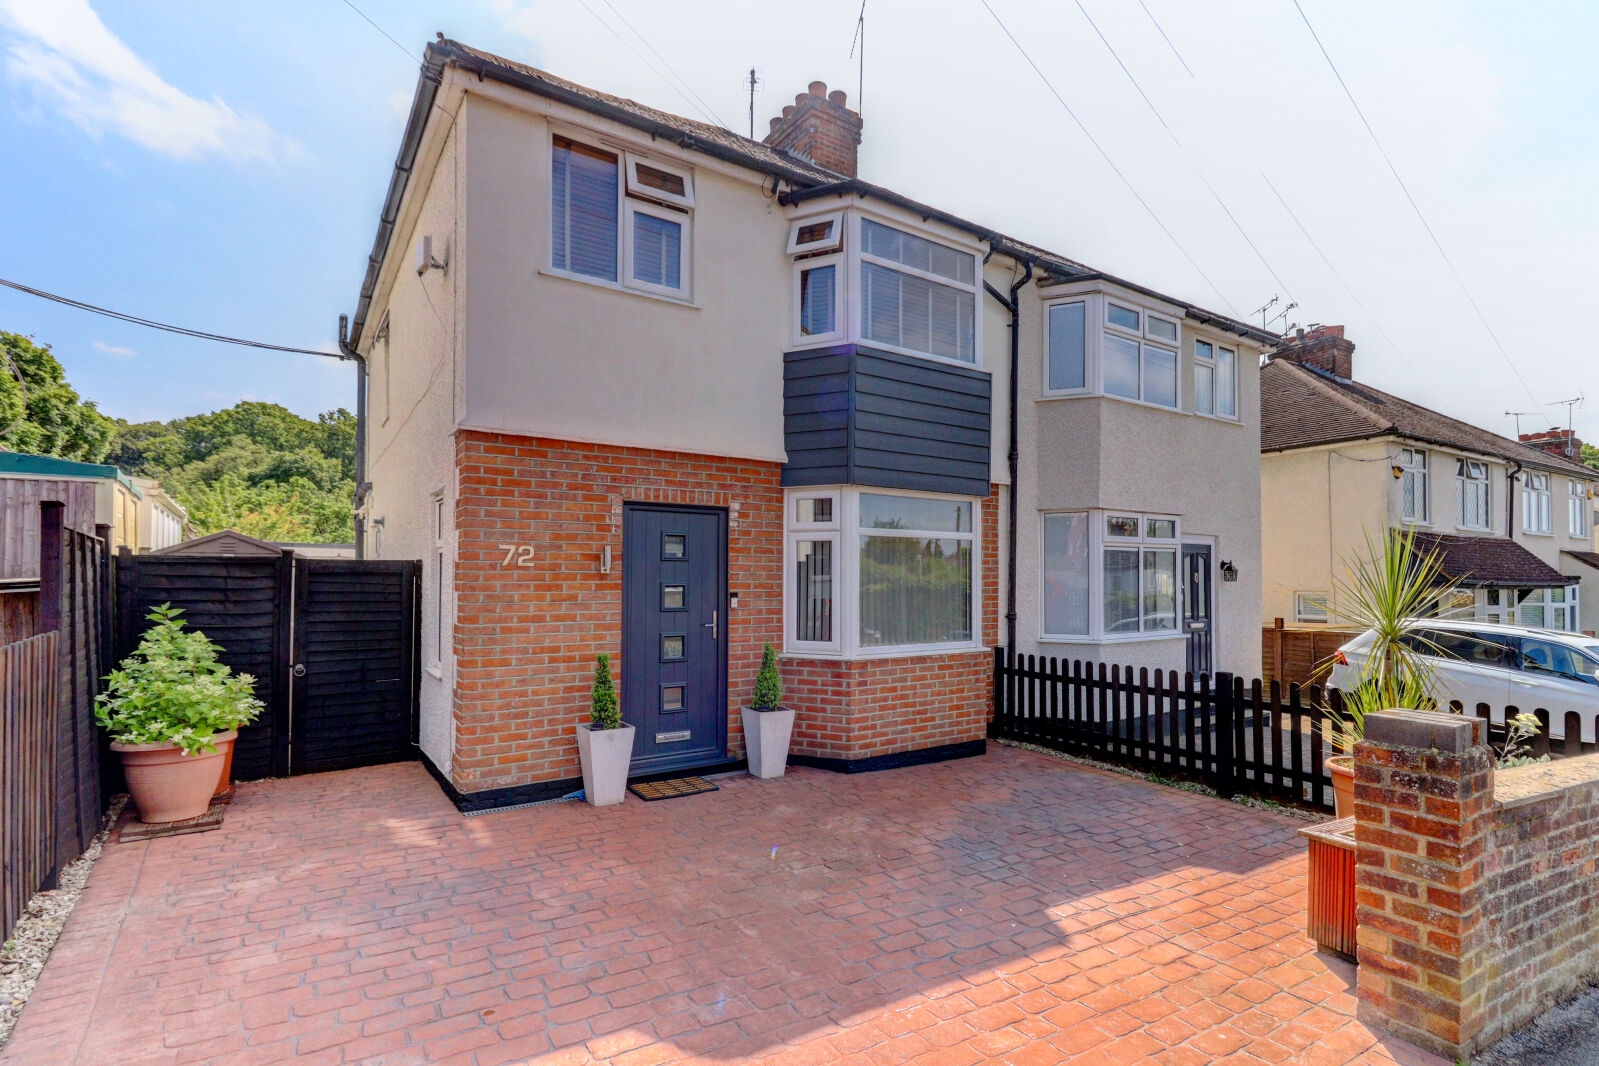 3 bedroom semi detached house for sale Totteridge Lane, High Wycombe, HP13, main image